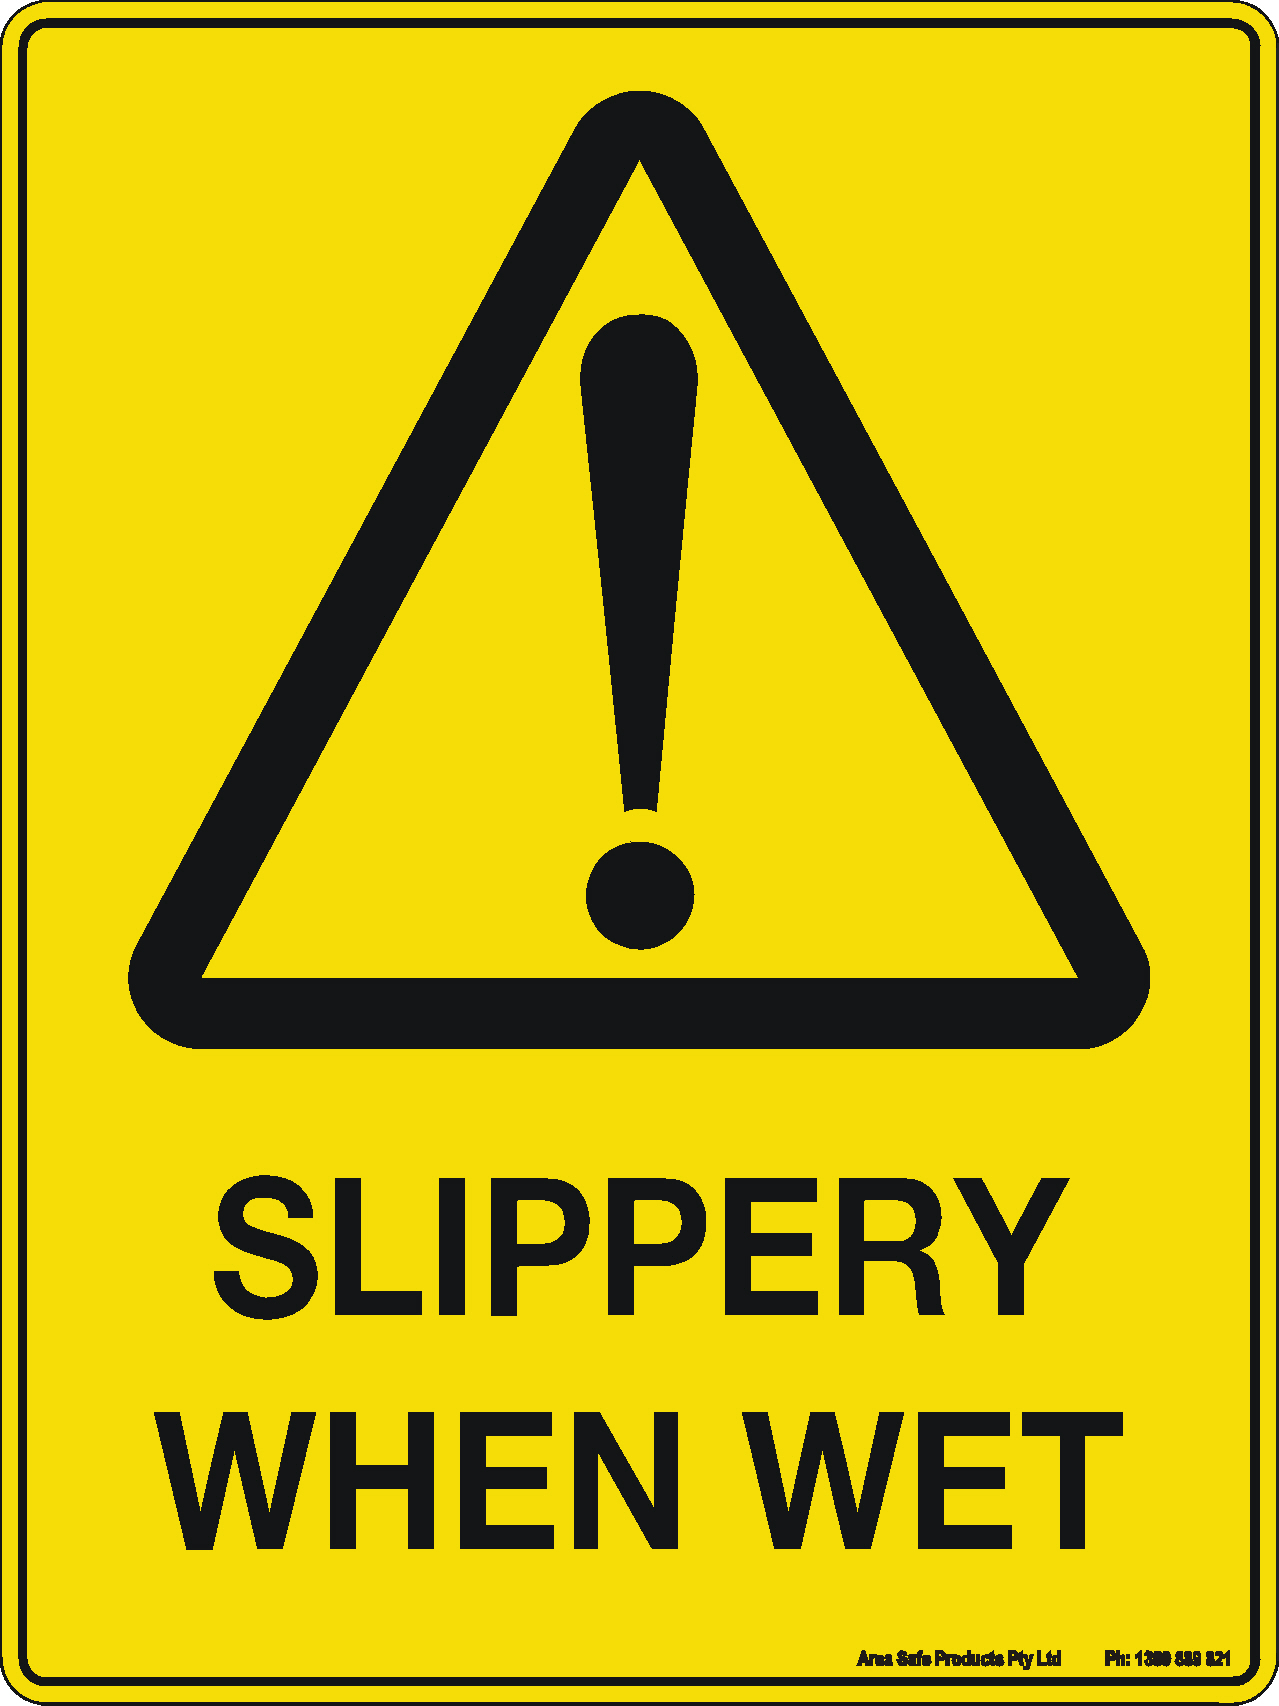 Caution Sign - Slippery When Wet